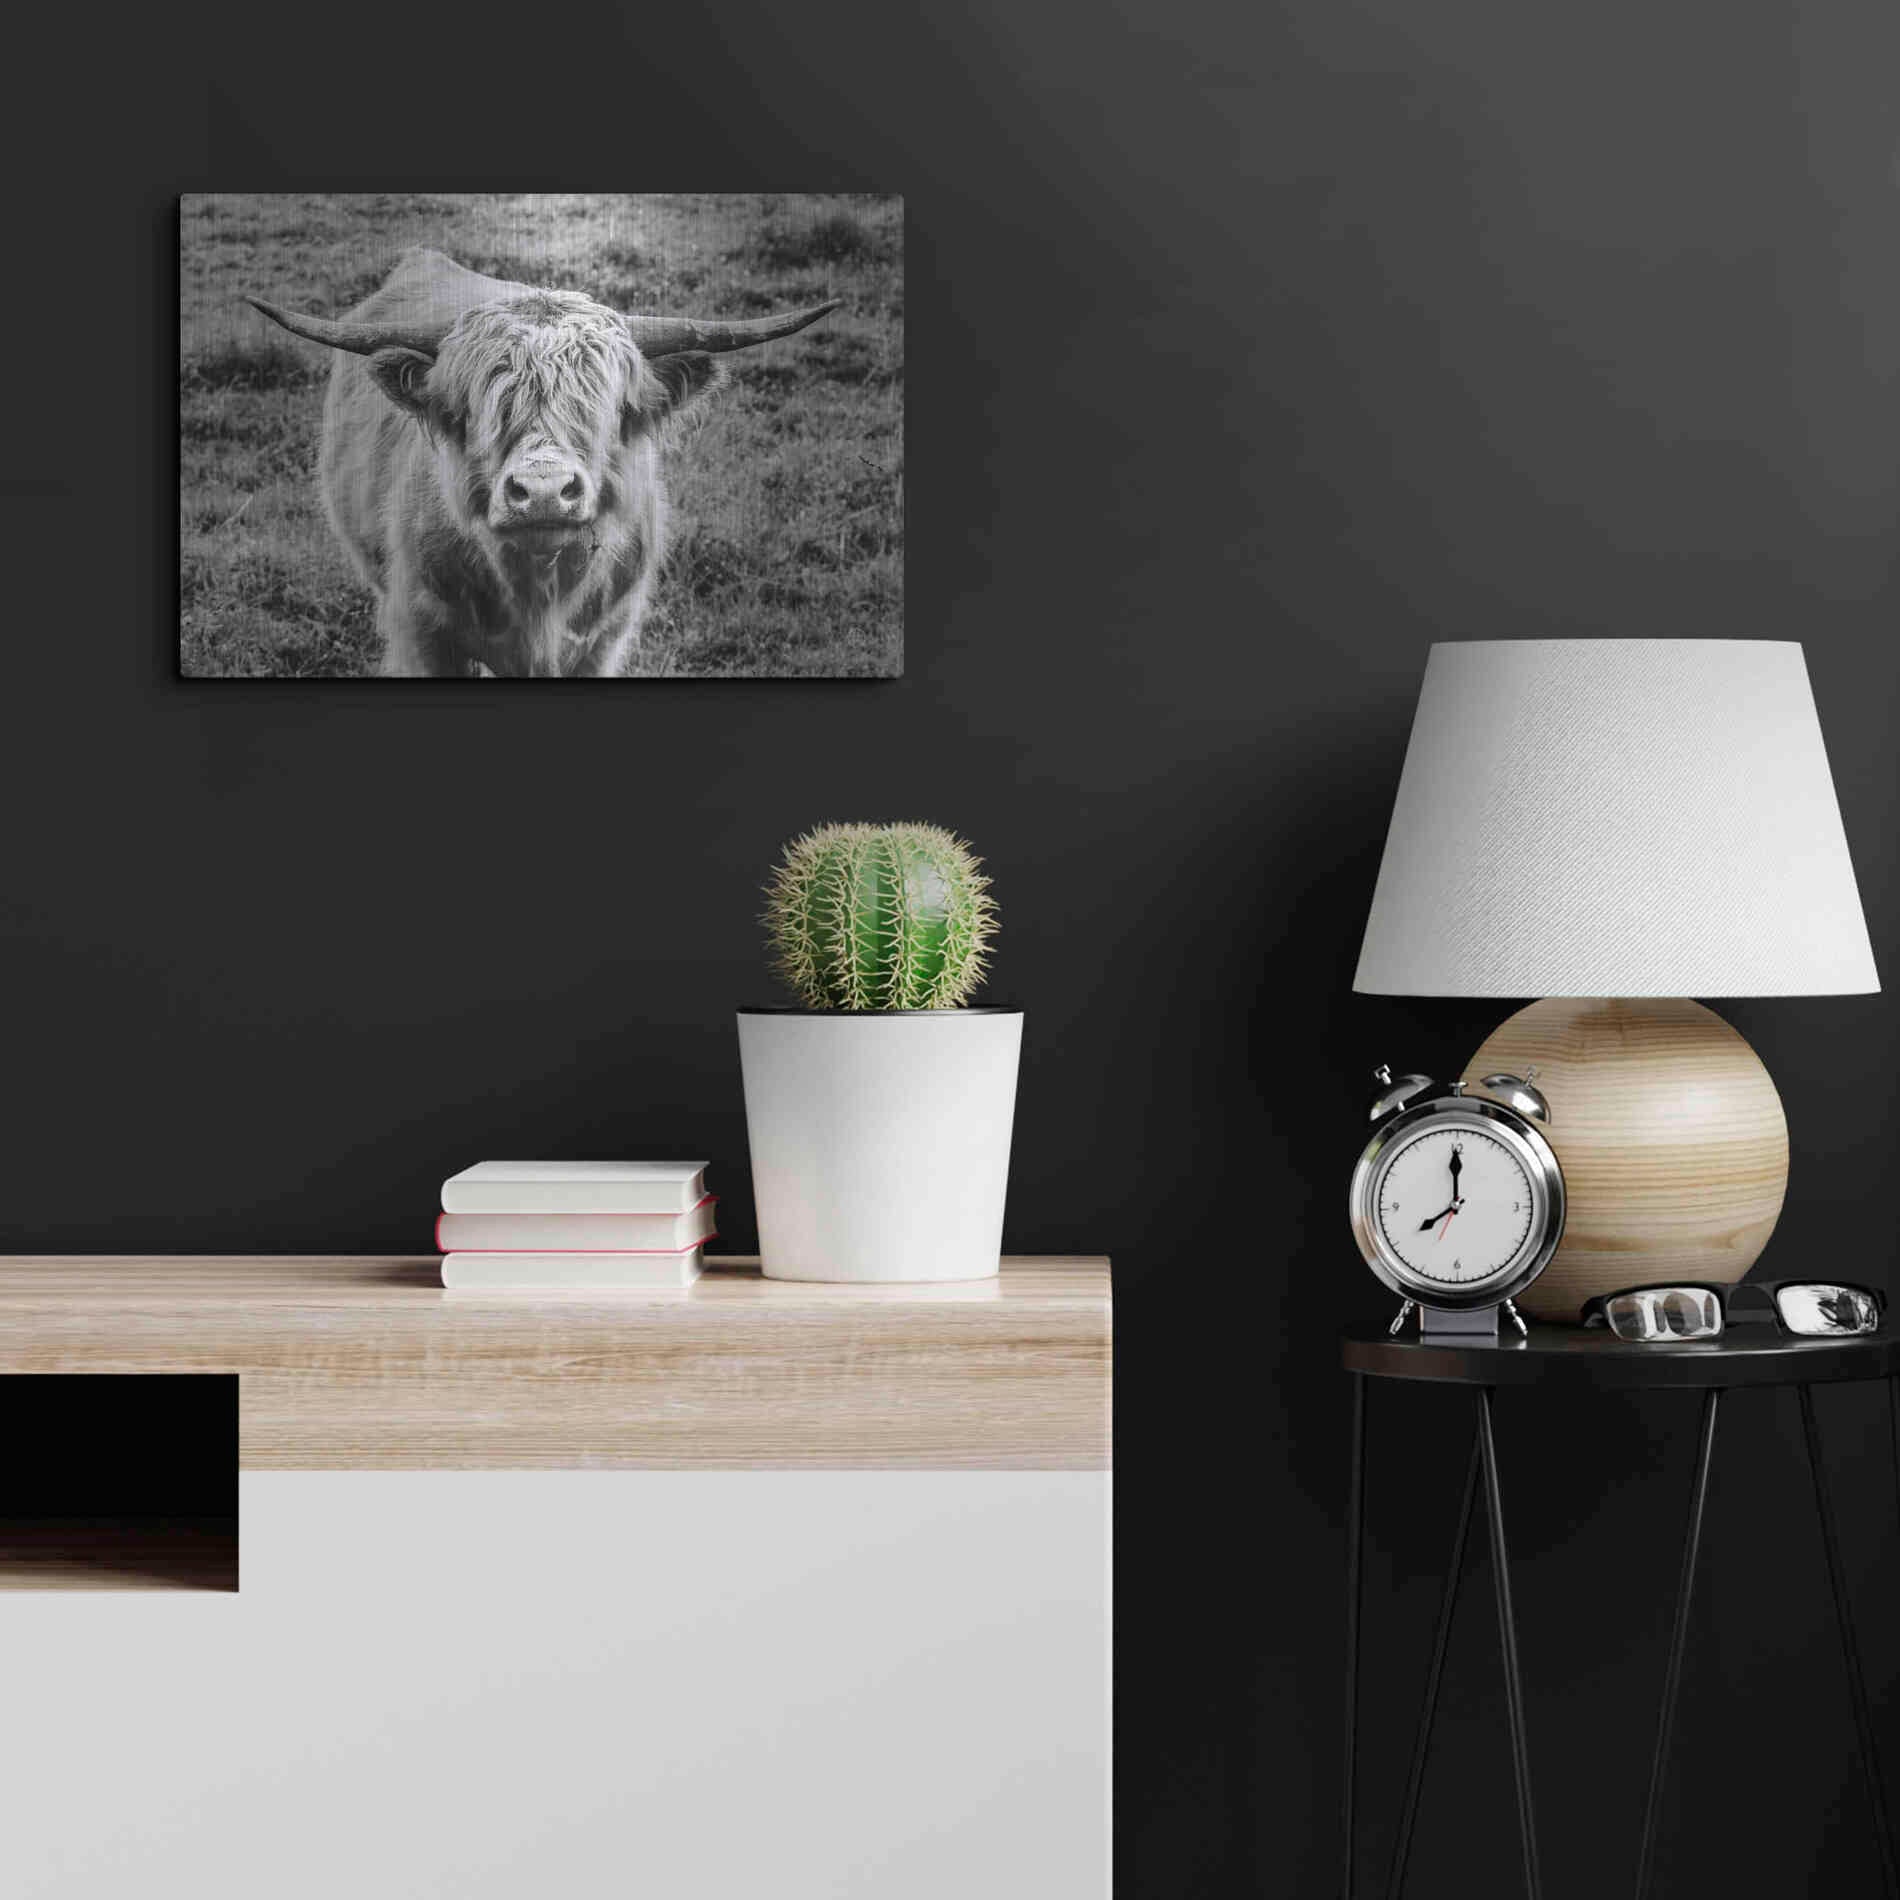 Luxe Metal Art 'Highland Cow Staring Contest' by Nathan Larson, Metal Wall Art,24x16